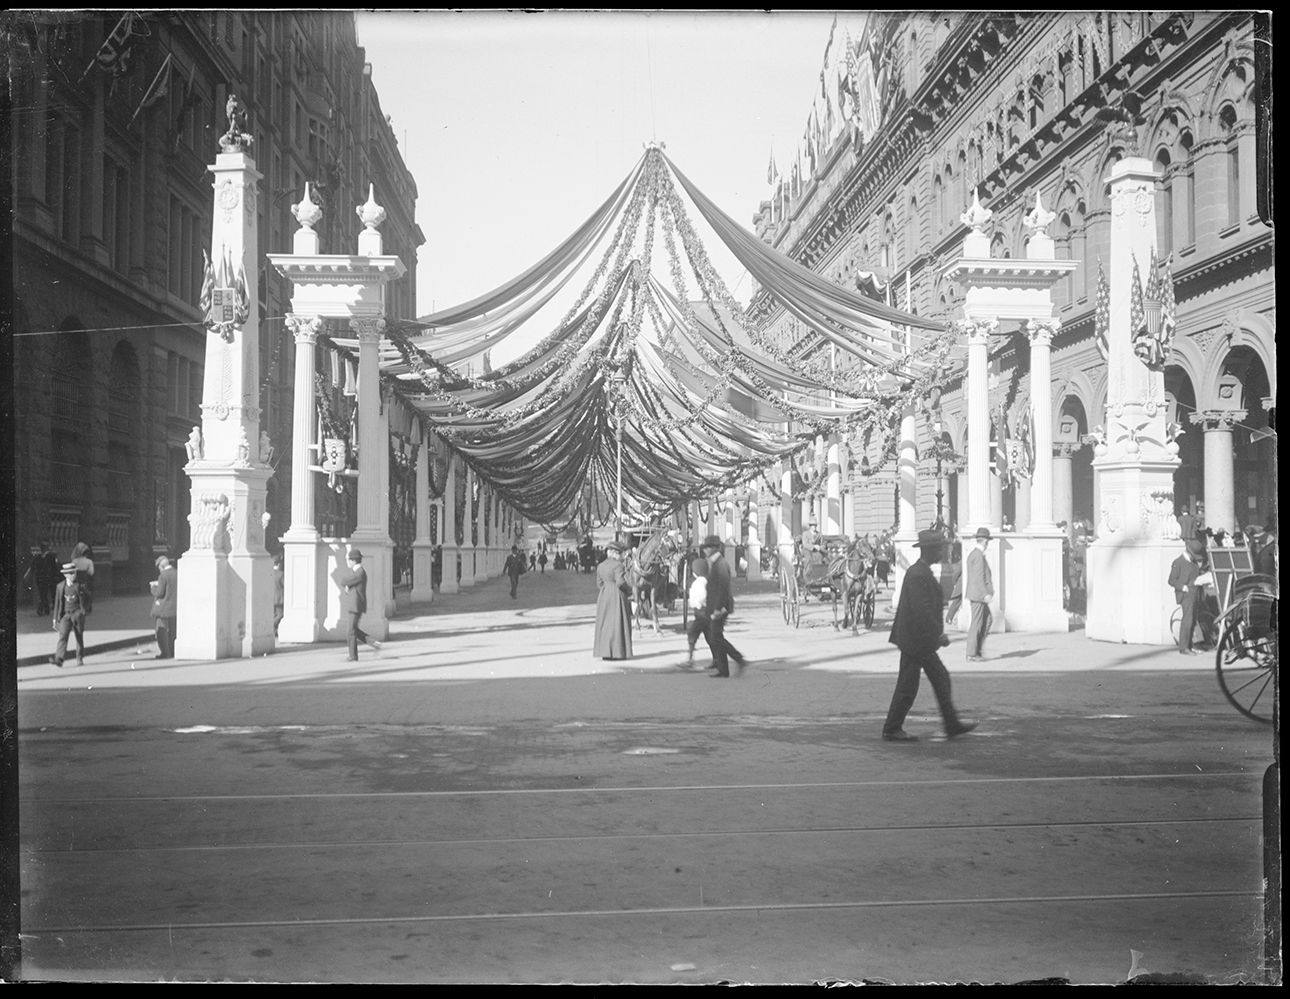 A street view showing decorations and streamers